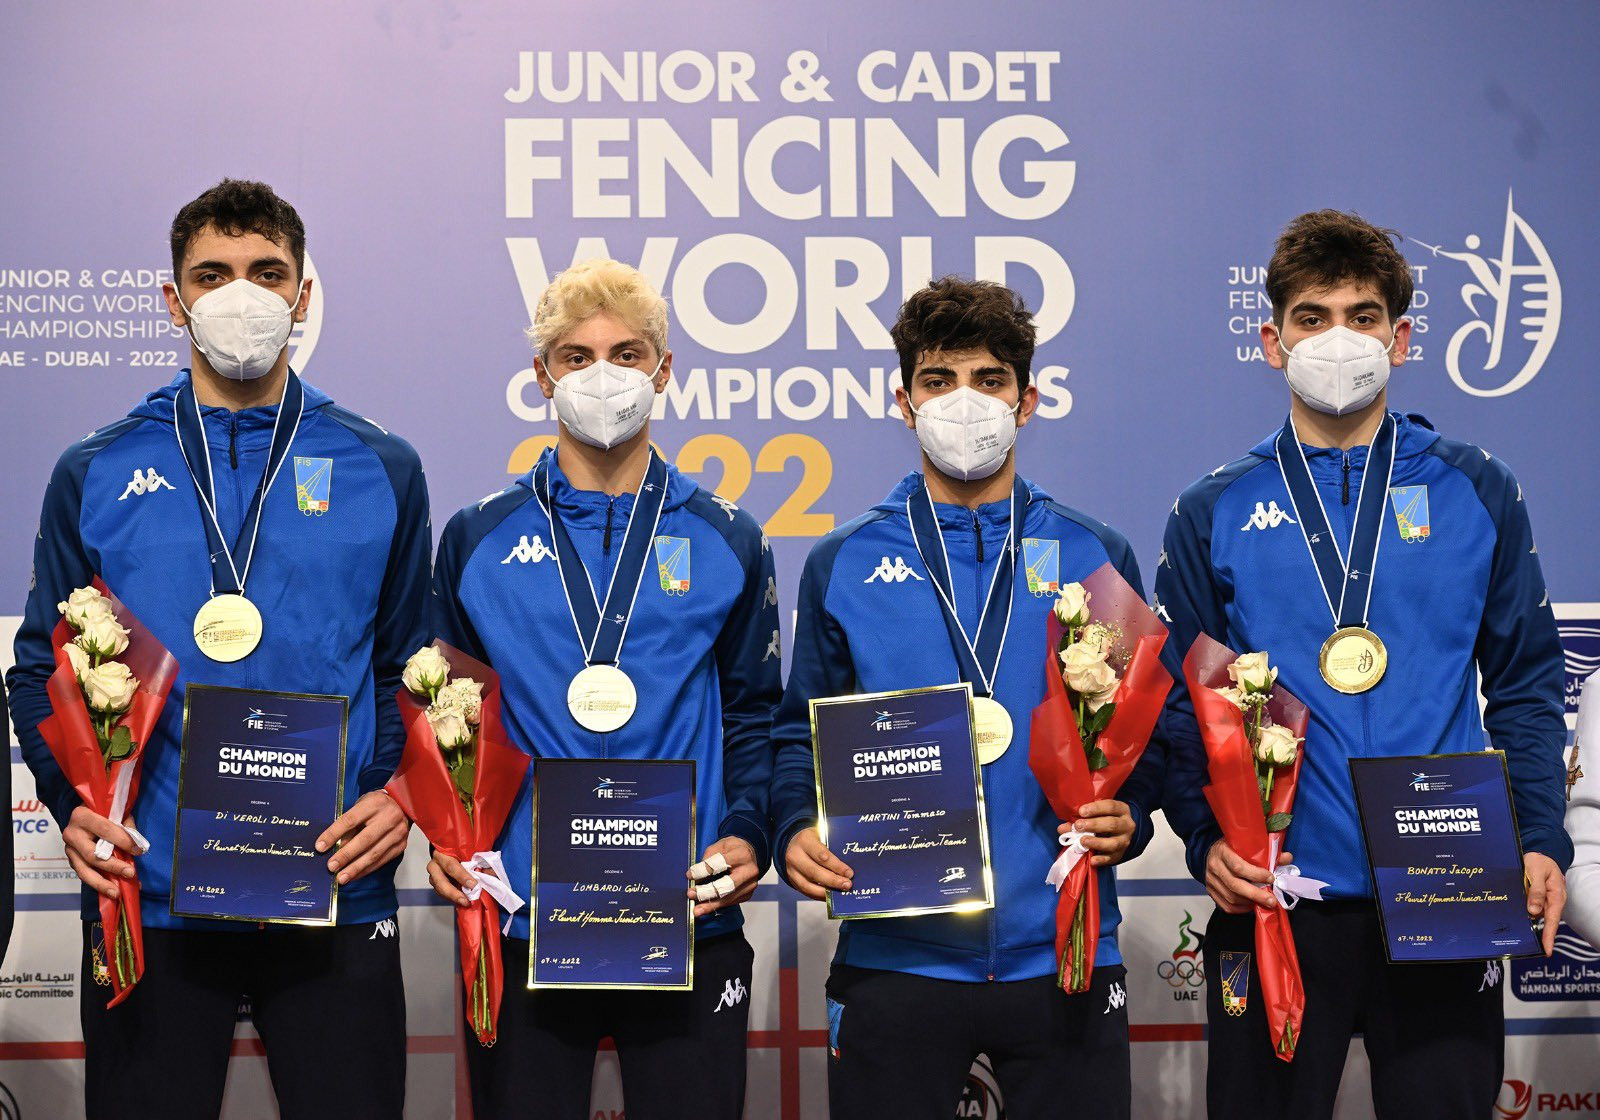 Italy denied golden double by the United States at Junior and Cadet Fencing World Championships